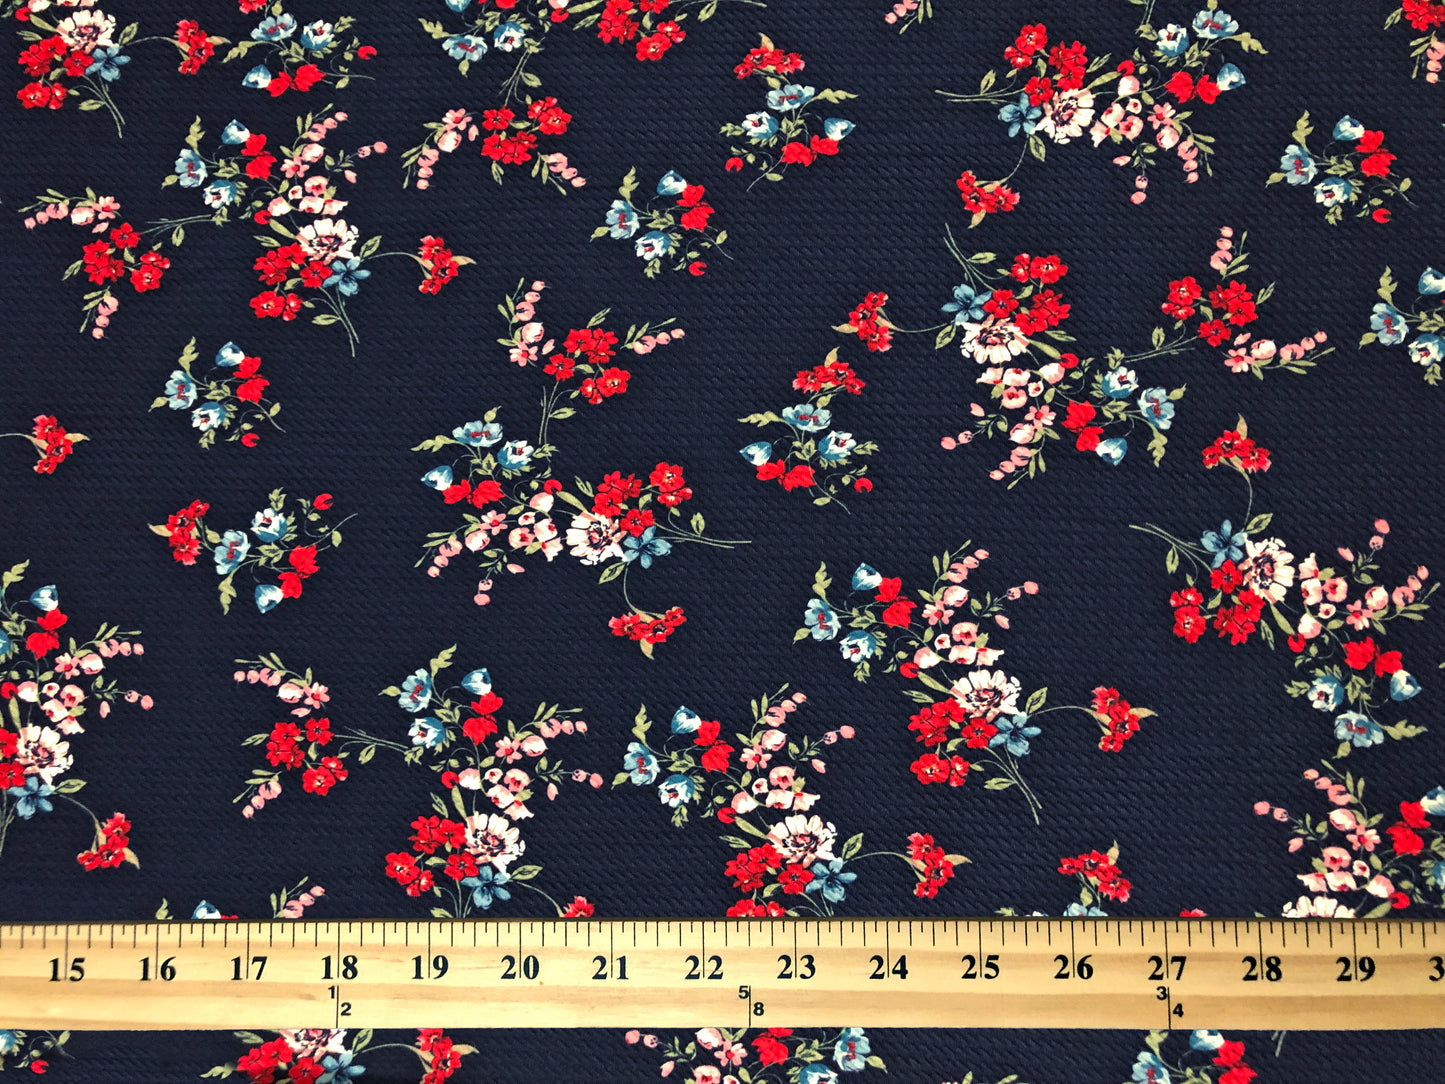 Bullet Knit Printed Fabric-Navy Blue Red Flowers-BPR271-Sold by the Yard